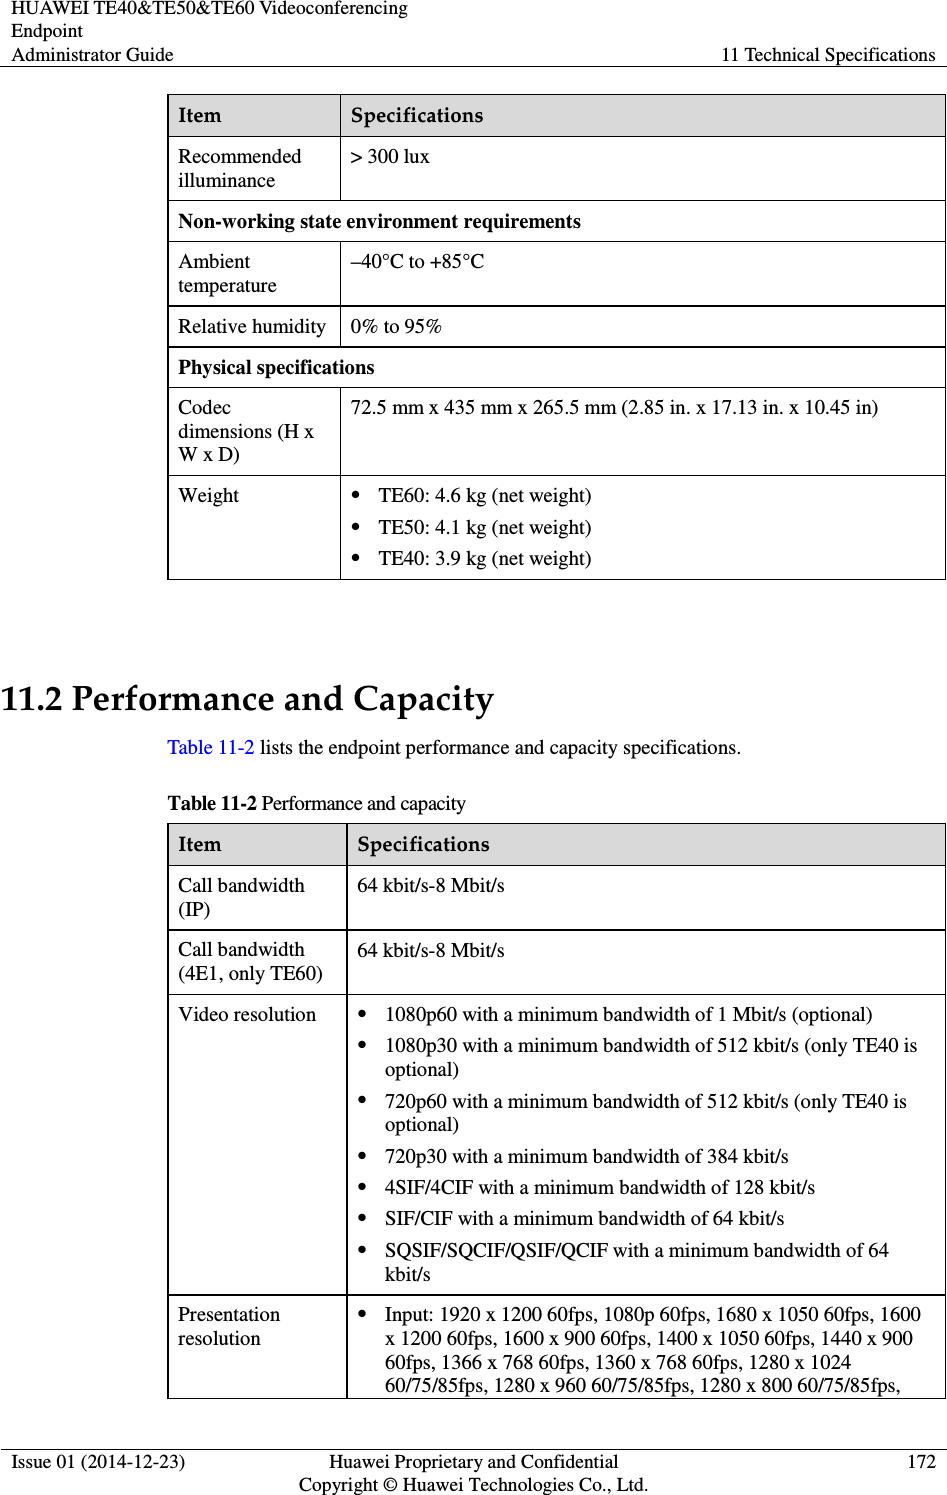 HUAWEI TE40&amp;TE50&amp;TE60 Videoconferencing Endpoint Administrator Guide  11 Technical Specifications  Issue 01 (2014-12-23)  Huawei Proprietary and Confidential                                     Copyright © Huawei Technologies Co., Ltd. 172  Item  Specifications Recommended illuminance &gt; 300 lux Non-working state environment requirements Ambient temperature –40°C to +85°C Relative humidity  0% to 95% Physical specifications Codec dimensions (H x W x D) 72.5 mm x 435 mm x 265.5 mm (2.85 in. x 17.13 in. x 10.45 in) Weight  TE60: 4.6 kg (net weight)  TE50: 4.1 kg (net weight)  TE40: 3.9 kg (net weight)  11.2 Performance and Capacity Table 11-2 lists the endpoint performance and capacity specifications. Table 11-2 Performance and capacity Item  Specifications Call bandwidth (IP) 64 kbit/s-8 Mbit/s Call bandwidth (4E1, only TE60) 64 kbit/s-8 Mbit/s Video resolution  1080p60 with a minimum bandwidth of 1 Mbit/s (optional)  1080p30 with a minimum bandwidth of 512 kbit/s (only TE40 is optional)  720p60 with a minimum bandwidth of 512 kbit/s (only TE40 is optional)  720p30 with a minimum bandwidth of 384 kbit/s  4SIF/4CIF with a minimum bandwidth of 128 kbit/s  SIF/CIF with a minimum bandwidth of 64 kbit/s  SQSIF/SQCIF/QSIF/QCIF with a minimum bandwidth of 64 kbit/s Presentation resolution  Input: 1920 x 1200 60fps, 1080p 60fps, 1680 x 1050 60fps, 1600 x 1200 60fps, 1600 x 900 60fps, 1400 x 1050 60fps, 1440 x 900 60fps, 1366 x 768 60fps, 1360 x 768 60fps, 1280 x 1024 60/75/85fps, 1280 x 960 60/75/85fps, 1280 x 800 60/75/85fps, 